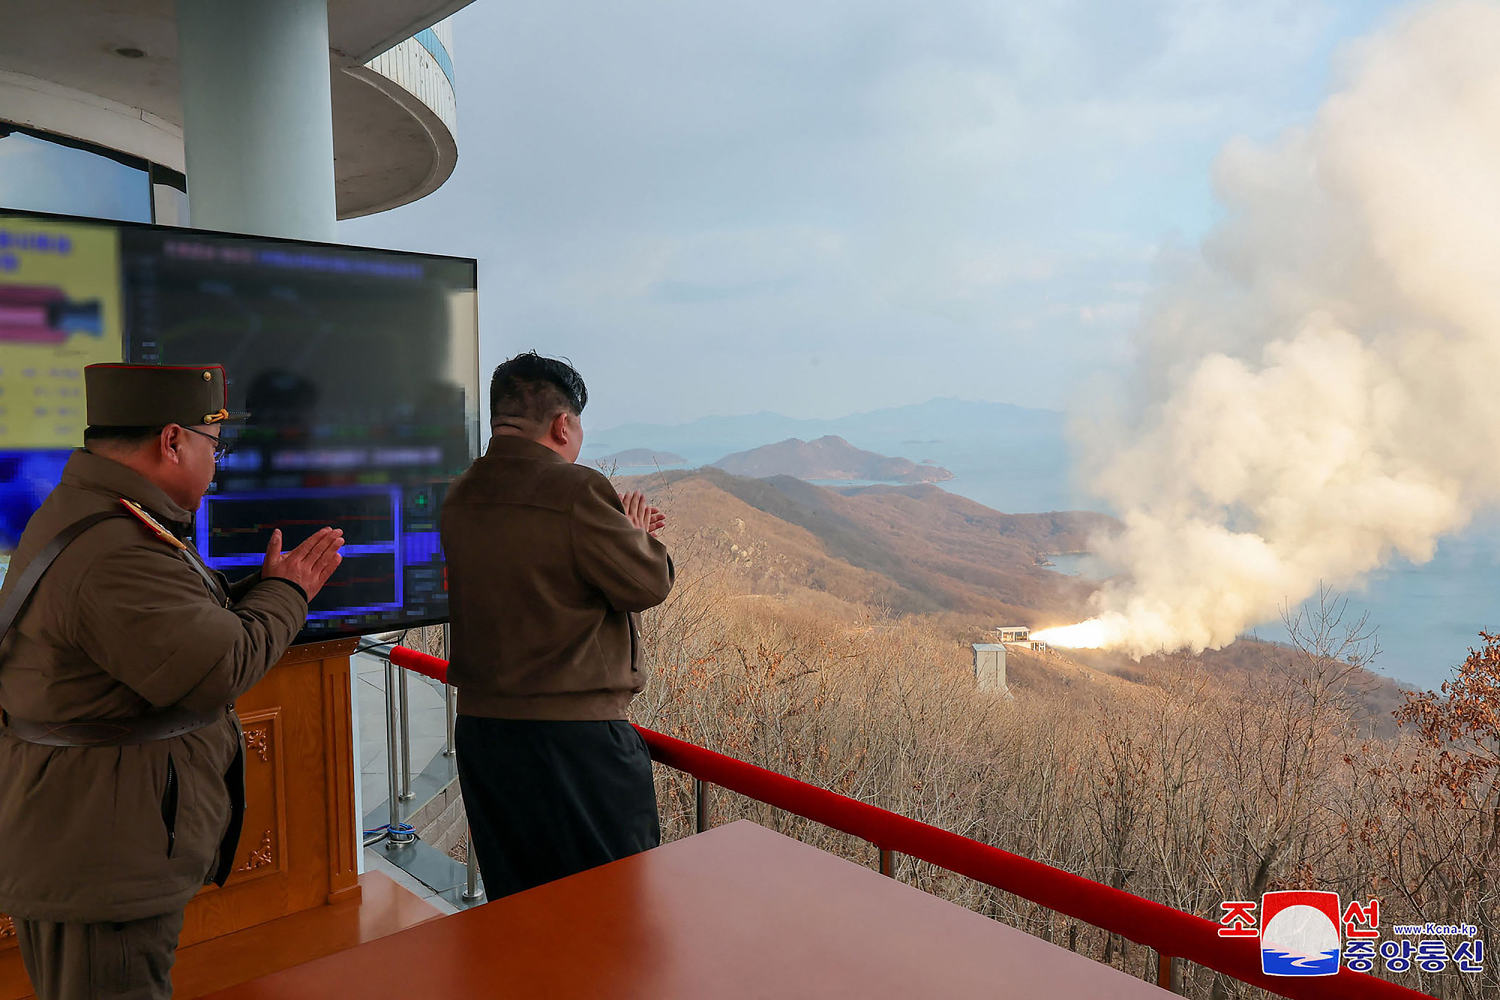 North Korea claims progress in developing a hypersonic missile designed to strike distant U.S. targets